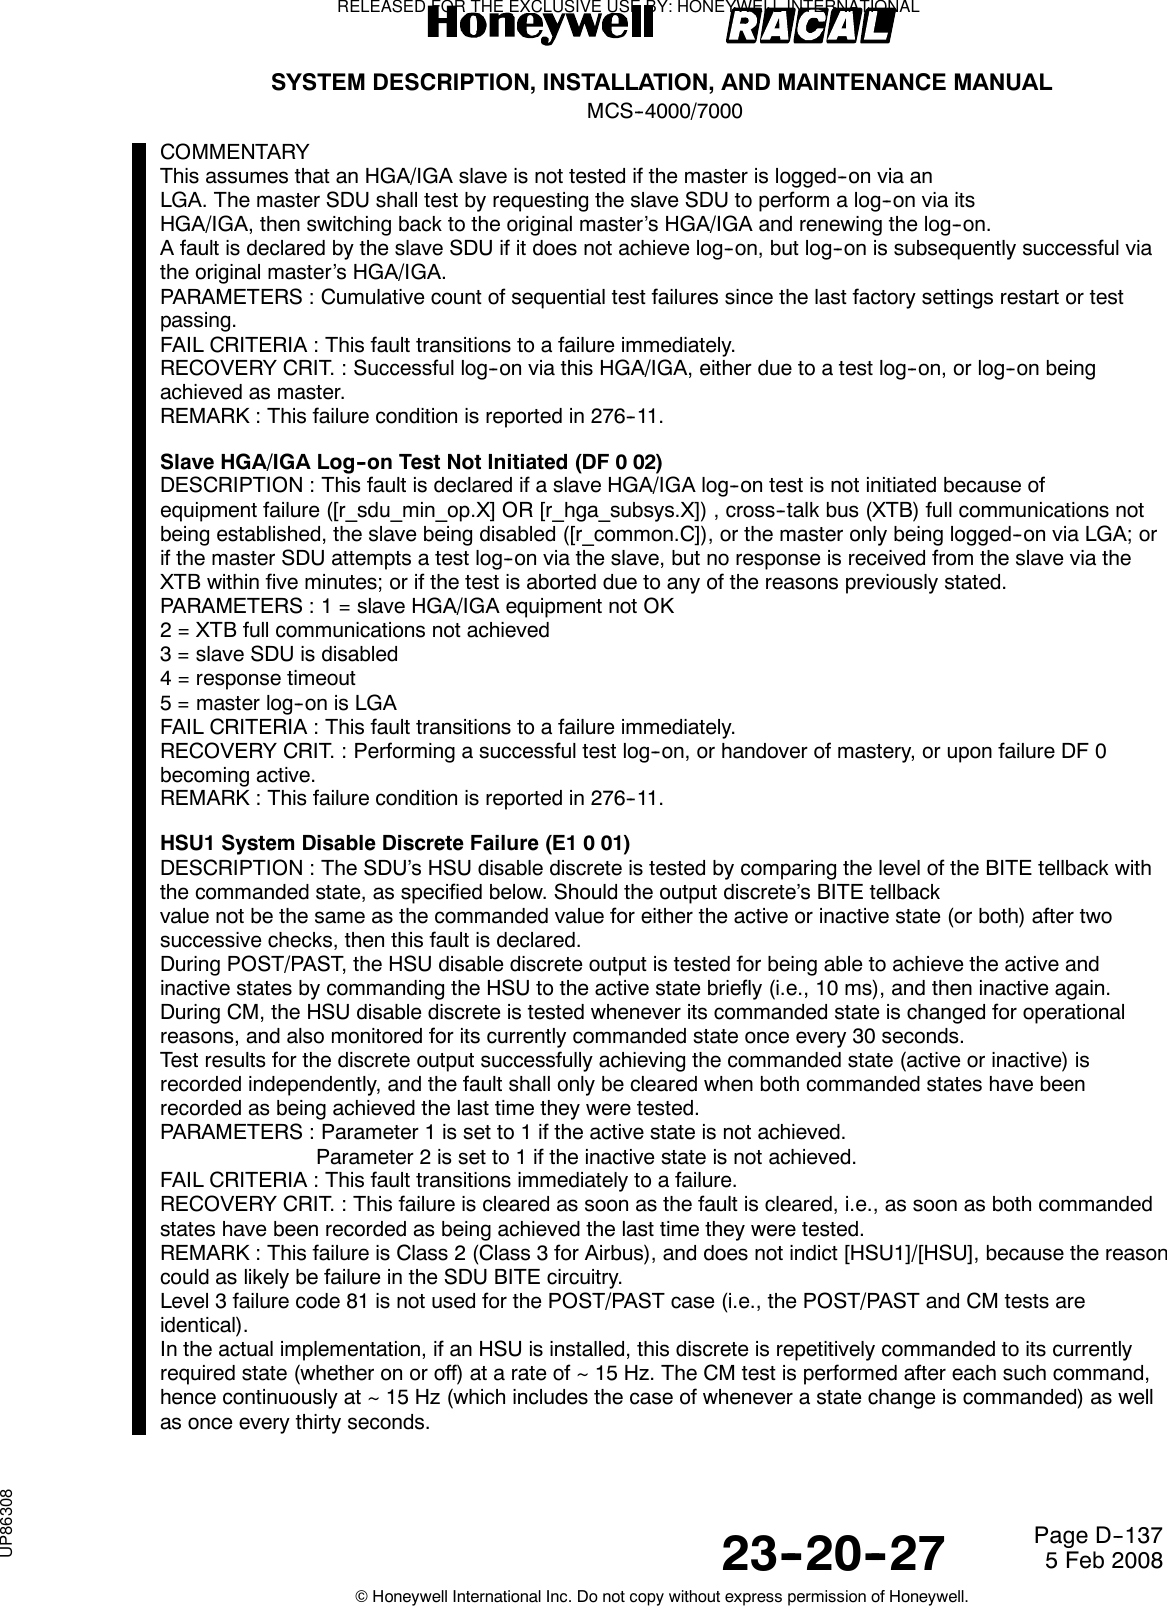 SYSTEM DESCRIPTION, INSTALLATION, AND MAINTENANCE MANUALMCS--4000/700023--20--27 5 Feb 2008©Honeywell International Inc. Do not copy without express permission of Honeywell.Page D--137COMMENTARYThis assumes that an HGA/IGA slave is not tested if the master is logged--on via anLGA. The master SDU shall test by requesting the slave SDU to perform a log--on via itsHGA/IGA, then switching back to the original master’s HGA/IGA and renewing the log--on.A fault is declared by the slave SDU if it does not achieve log--on, but log--on is subsequently successful viathe original master’s HGA/IGA.PARAMETERS : Cumulative count of sequential test failures since the last factory settings restart or testpassing.FAIL CRITERIA : This fault transitions to a failure immediately.RECOVERY CRIT. : Successful log--on via this HGA/IGA, either due to a test log--on, or log--on beingachieved as master.REMARK : This failure condition is reported in 276--11.Slave HGA/IGA Log--on Test Not Initiated (DF 0 02)DESCRIPTION : This fault is declared if a slave HGA/IGA log--on test is not initiated because ofequipment failure ([r_sdu_min_op.X] OR [r_hga_subsys.X]) , cross--talk bus (XTB) full communications notbeing established, the slave being disabled ([r_common.C]), or the master only being logged--on via LGA; orif the master SDU attempts a test log--on via the slave, but no response is received from the slave via theXTB within five minutes; or if the test is aborted due to any of the reasons previously stated.PARAMETERS : 1 = slave HGA/IGA equipment not OK2 = XTB full communications not achieved3 = slave SDU is disabled4 = response timeout5=masterlog--onisLGAFAIL CRITERIA : This fault transitions to a failure immediately.RECOVERY CRIT. : Performing a successful test log--on, or handover of mastery, or upon failure DF 0becoming active.REMARK : This failure condition is reported in 276--11.HSU1 System Disable Discrete Failure (E1 0 01)DESCRIPTION : The SDU’s HSU disable discrete is tested by comparing the level of the BITE tellback withthe commanded state, as specified below. Should the output discrete’s BITE tellbackvalue not be the same as the commanded value for either the active or inactive state (or both) after twosuccessive checks, then this fault is declared.During POST/PAST, the HSU disable discrete output is tested for being able to achieve the active andinactive states by commanding the HSU to the active state briefly (i.e., 10 ms), and then inactive again.During CM, the HSU disable discrete is tested whenever its commanded state is changed for operationalreasons, and also monitored for its currently commanded state once every 30 seconds.Test results for the discrete output successfully achieving the commanded state (active or inactive) isrecorded independently, and the fault shall only be cleared when both commanded states have beenrecorded as being achieved the last time they were tested.PARAMETERS : Parameter 1 is set to 1 if the active state is not achieved.Parameter 2 is set to 1 if the inactive state is not achieved.FAIL CRITERIA : This fault transitions immediately to a failure.RECOVERY CRIT. : This failure is cleared as soon as the fault is cleared, i.e., as soon as both commandedstates have been recorded as being achieved the last time they were tested.REMARK : This failure is Class 2 (Class 3 for Airbus), and does not indict [HSU1]/[HSU], because the reasoncould as likely be failure in the SDU BITE circuitry.Level 3 failure code 81 is not used for the POST/PAST case (i.e., the POST/PAST and CM tests areidentical).In the actual implementation, if an HSU is installed, this discrete is repetitively commanded to its currentlyrequired state (whether on or off) at a rate of ~ 15 Hz. The CM test is performed after each such command,hence continuously at ~ 15 Hz (which includes the case of whenever a state change is commanded) as wellas once every thirty seconds.RELEASED FOR THE EXCLUSIVE USE BY: HONEYWELL INTERNATIONALUP86308